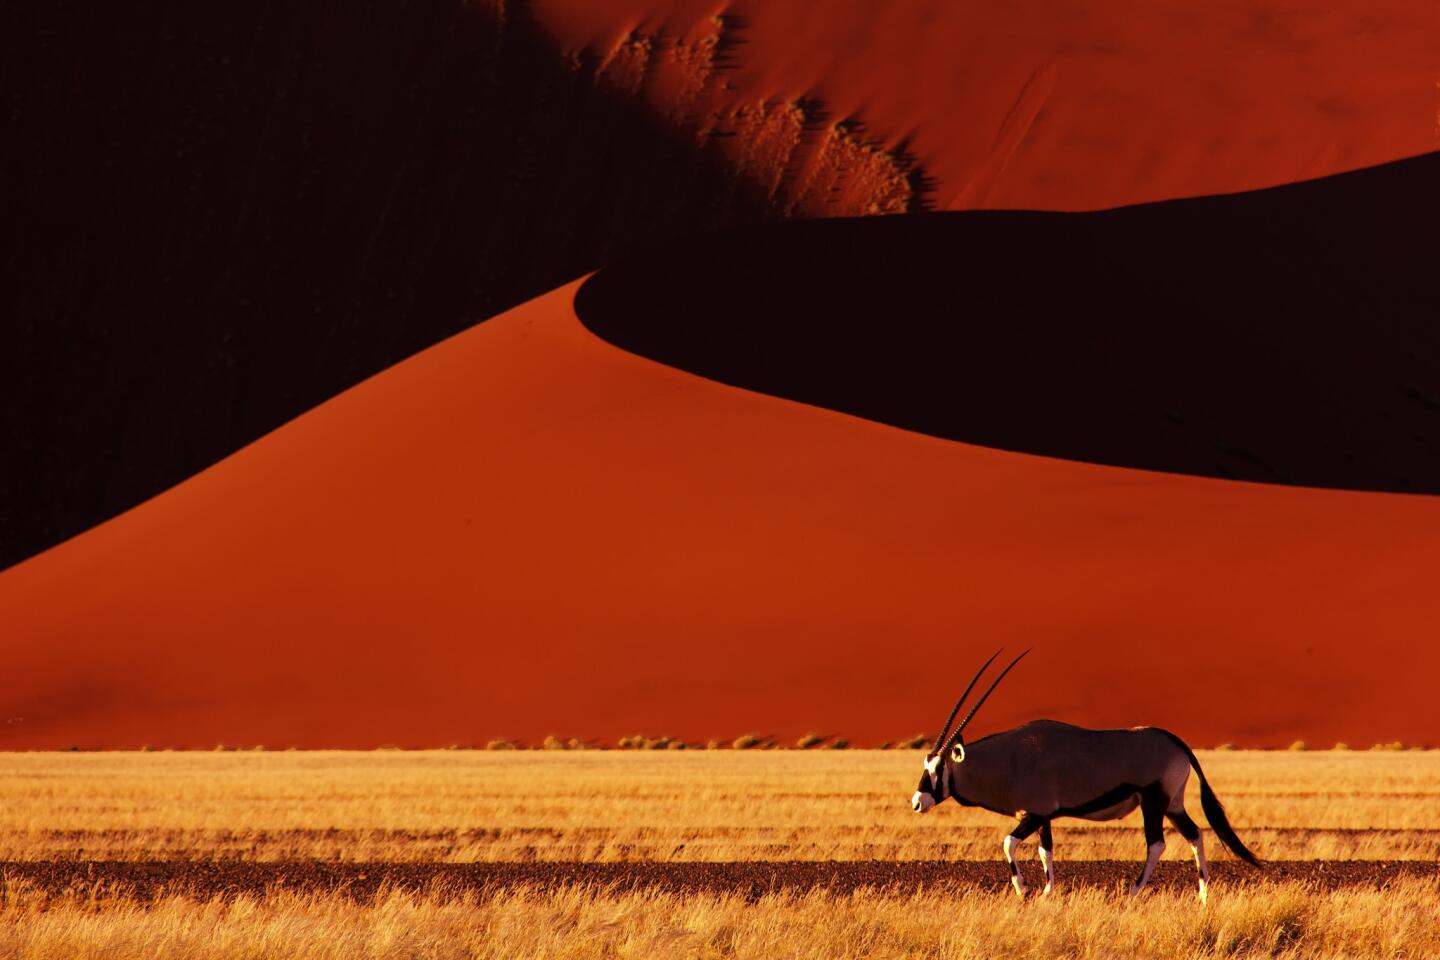 An oryx walks in the early morning past Dune 45 in the Namib desert at Sossusvlei.